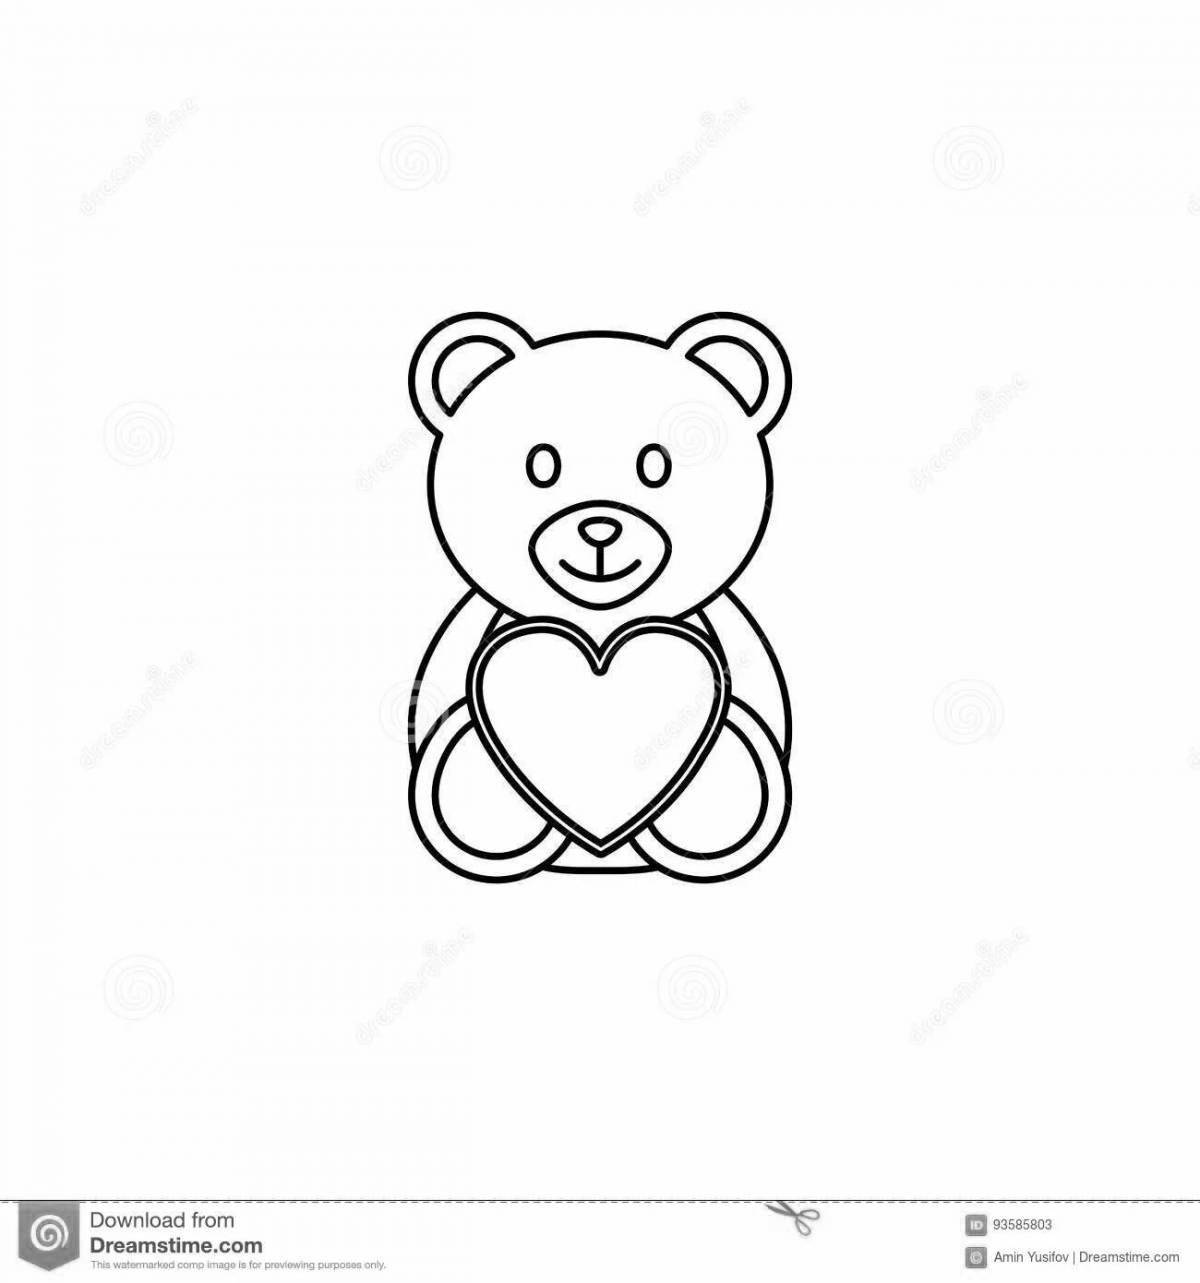 Teddy bear with a heart coloring book